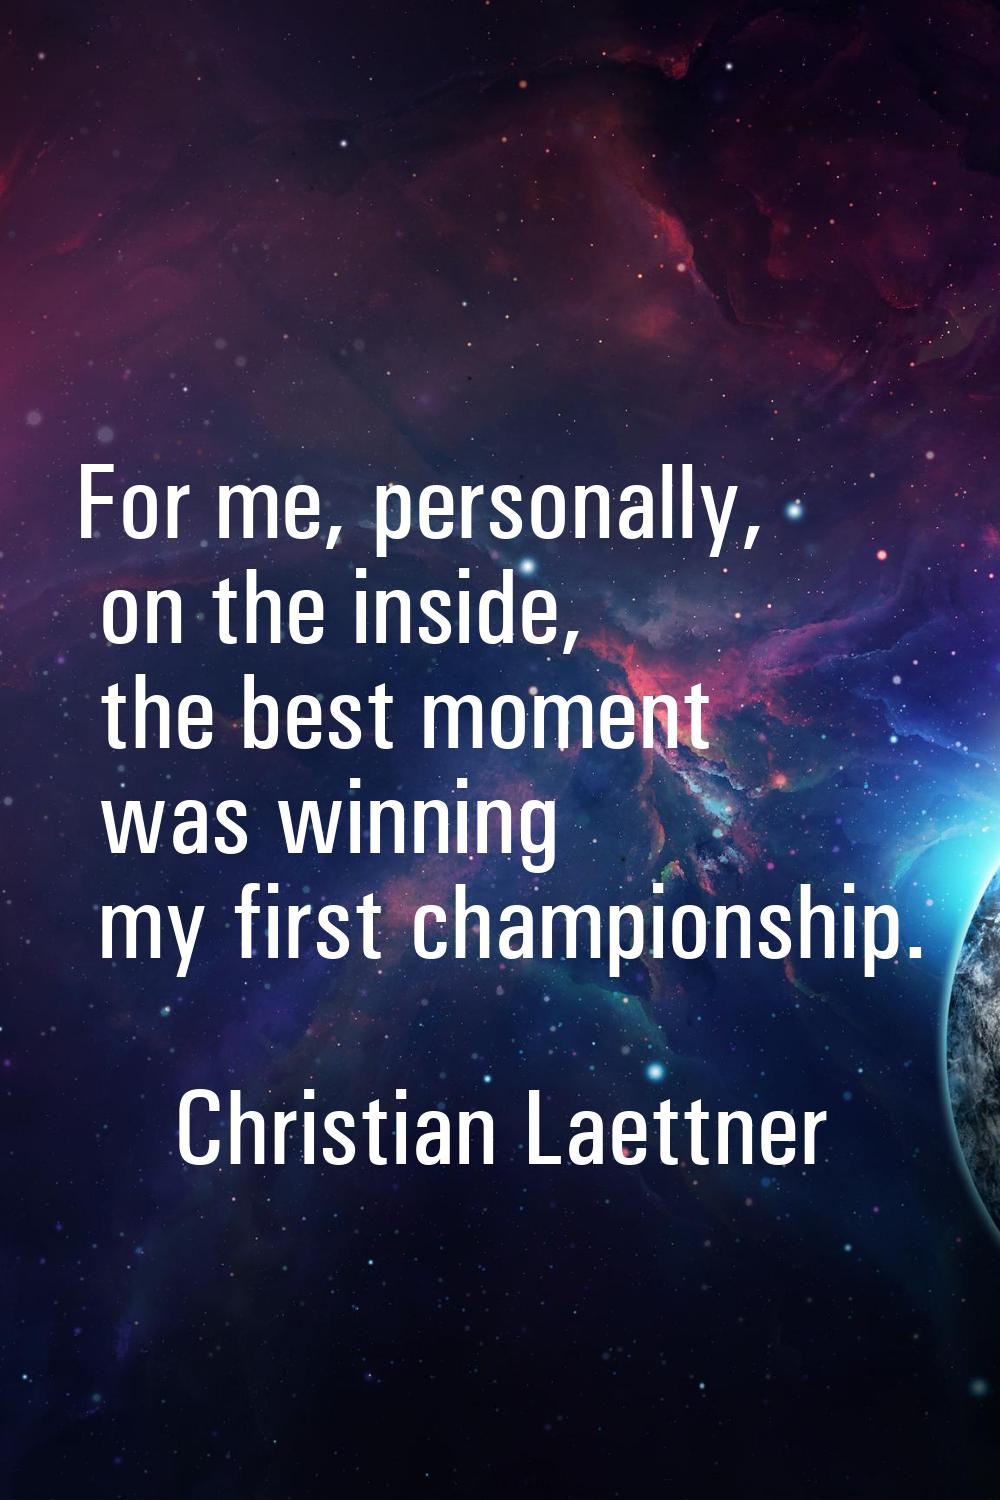 For me, personally, on the inside, the best moment was winning my first championship.